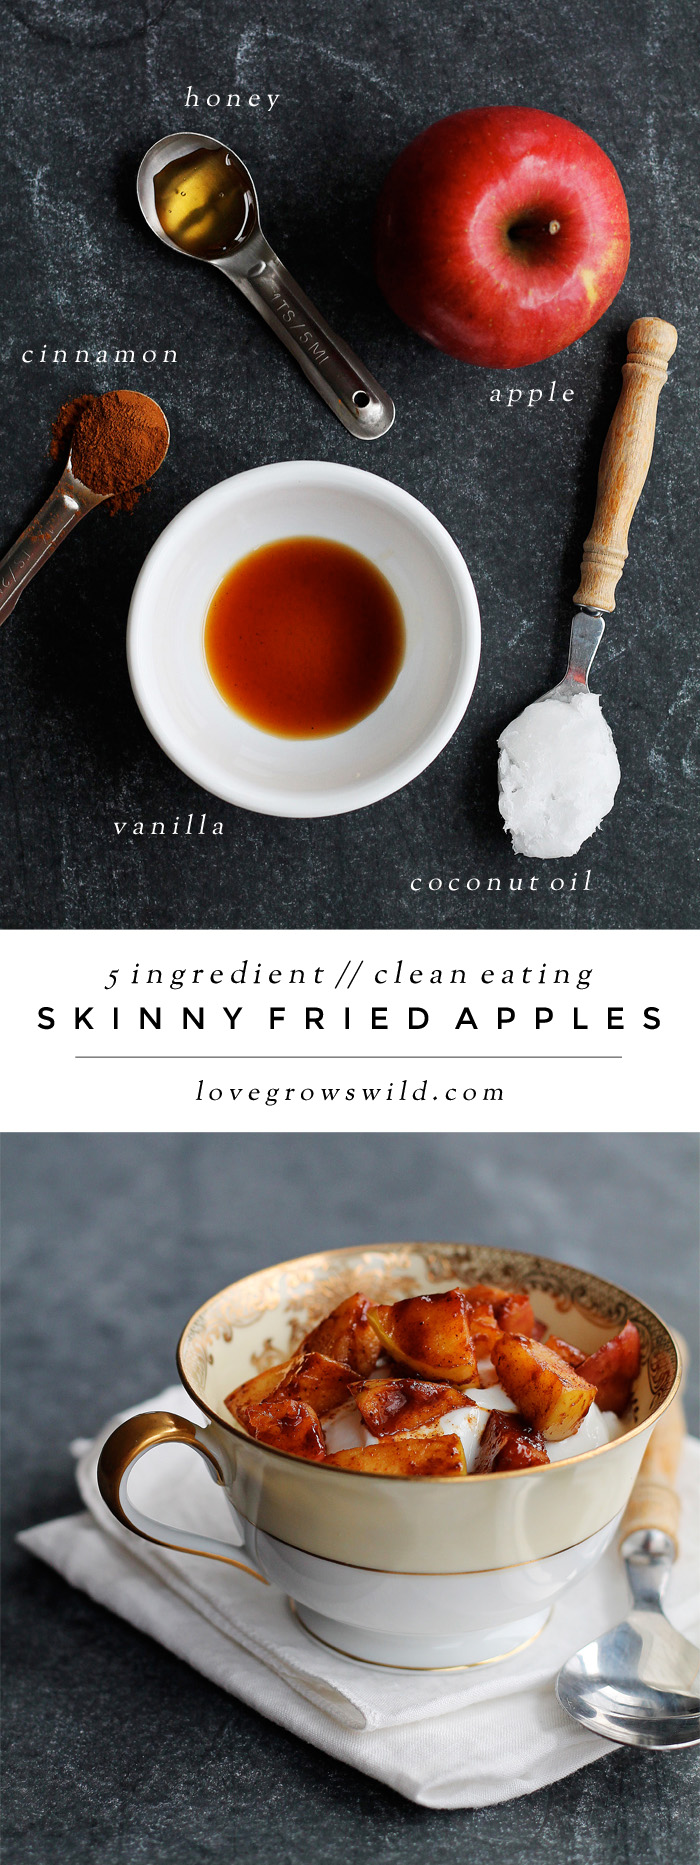 Skinny Fried Apples - a simple clean-eating dessert made in less than 5 minutes with just 5 healthy ingredients. Satisfy that sweet tooth without the guilt! | LoveGrowsWild.com